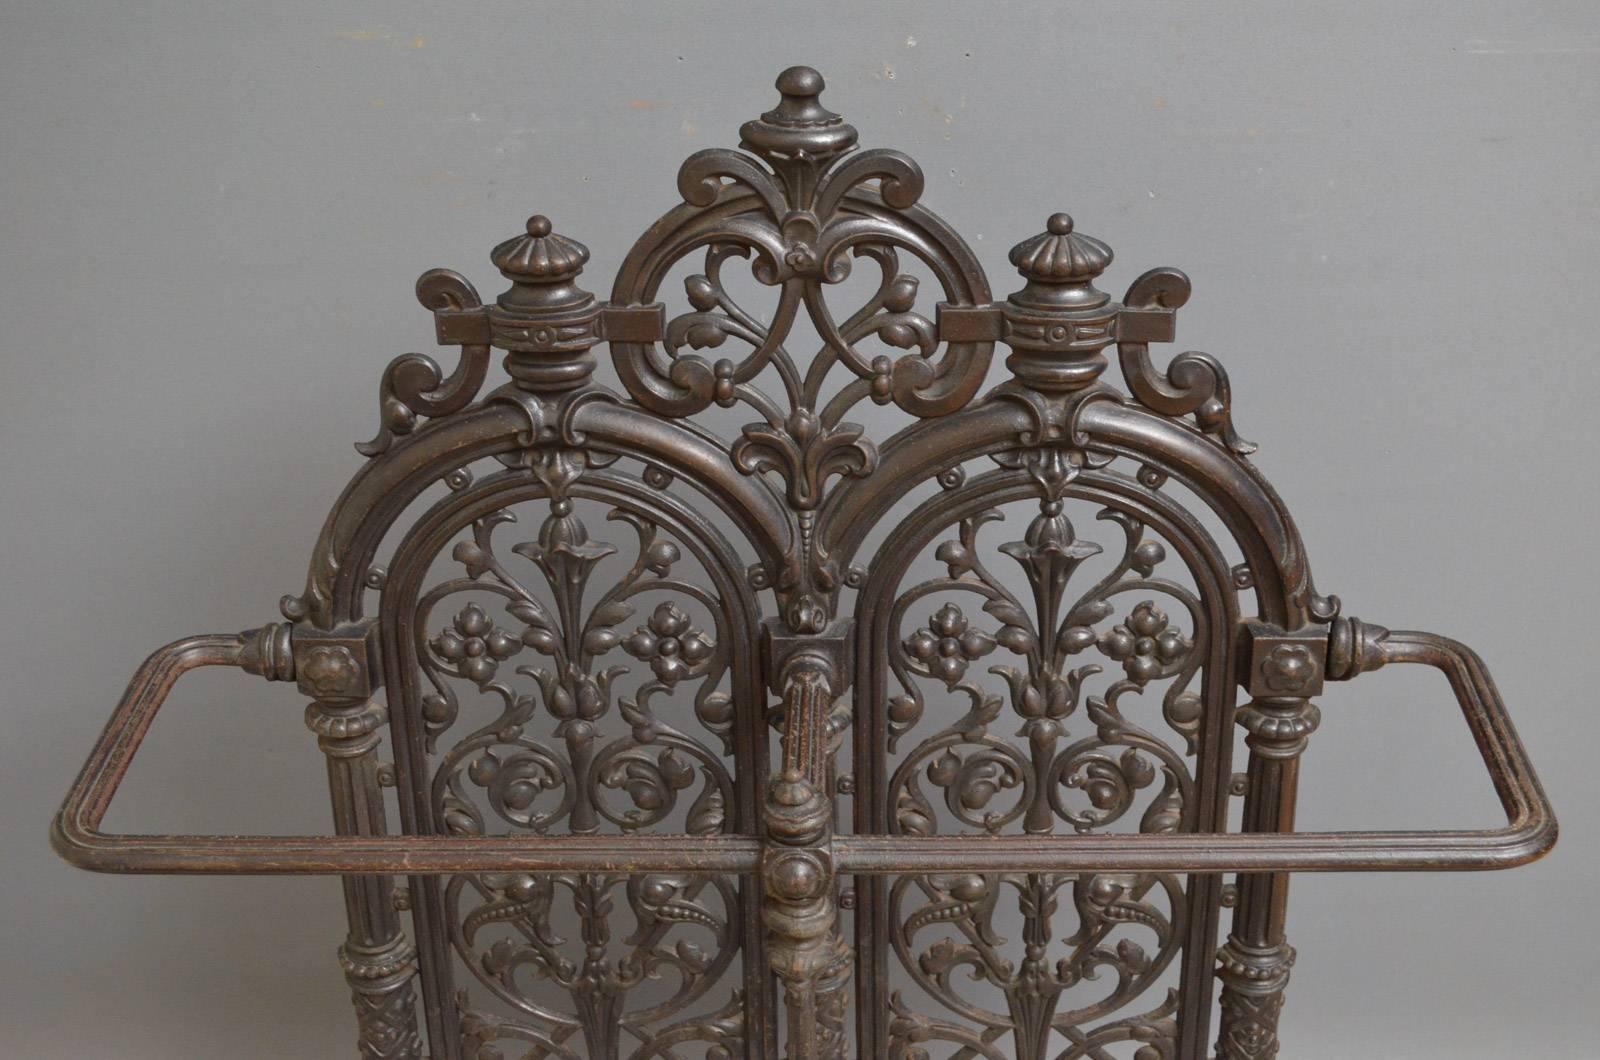 Sn4224, a large Victorian cast iron stick stand by Carron with beautiful pierced design and enamelled drip trays, all in fantastic original condition, stamped, circa 1860
Measures: H 39